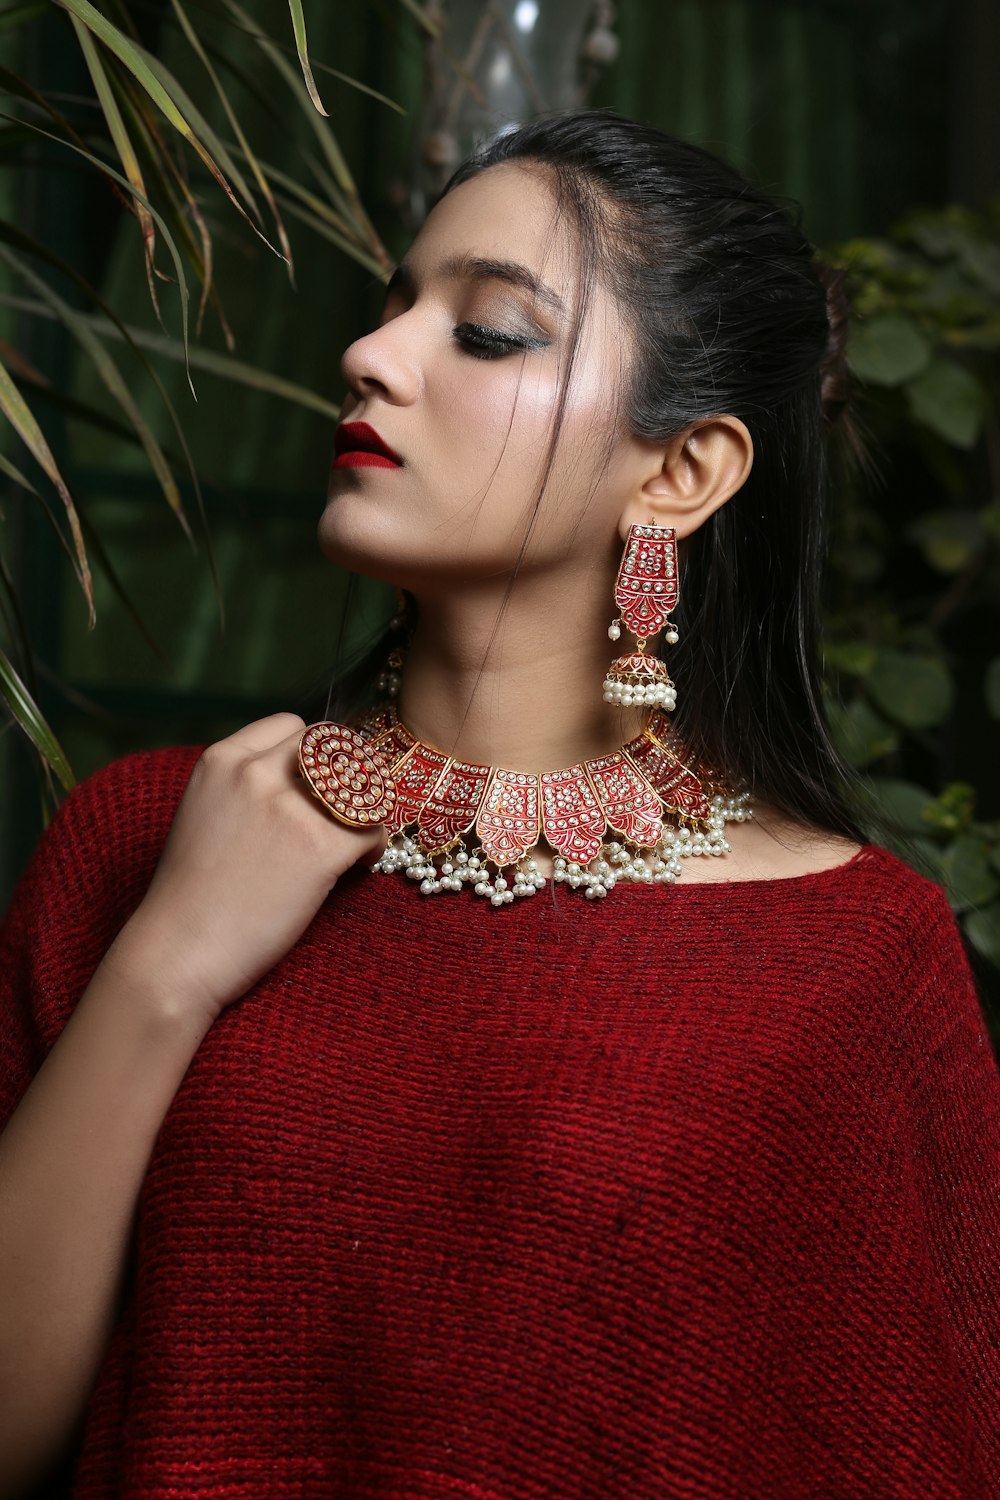 a woman wearing a red sweater and a pair of earrings